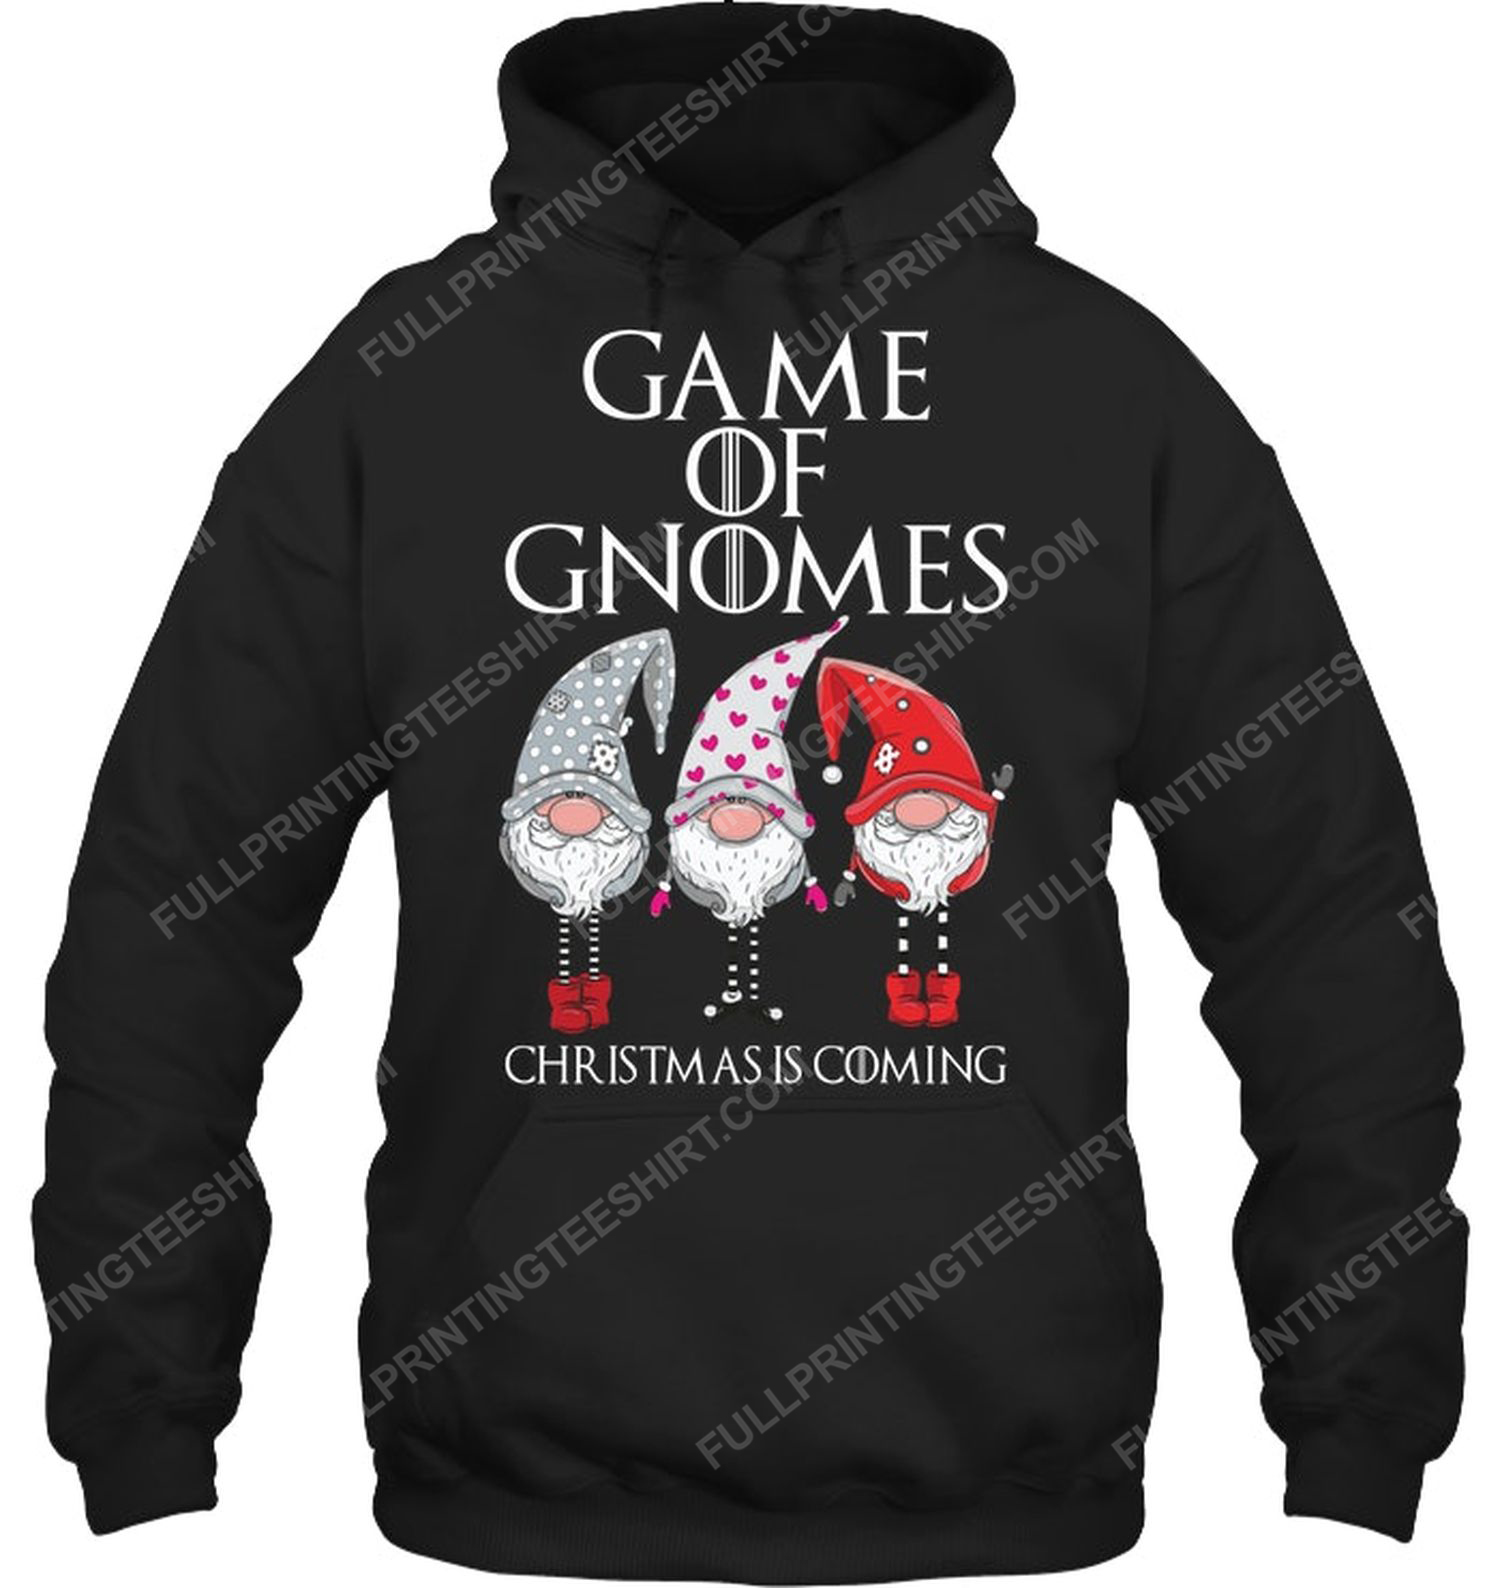 Game of gnomes christmas is coming hoodie